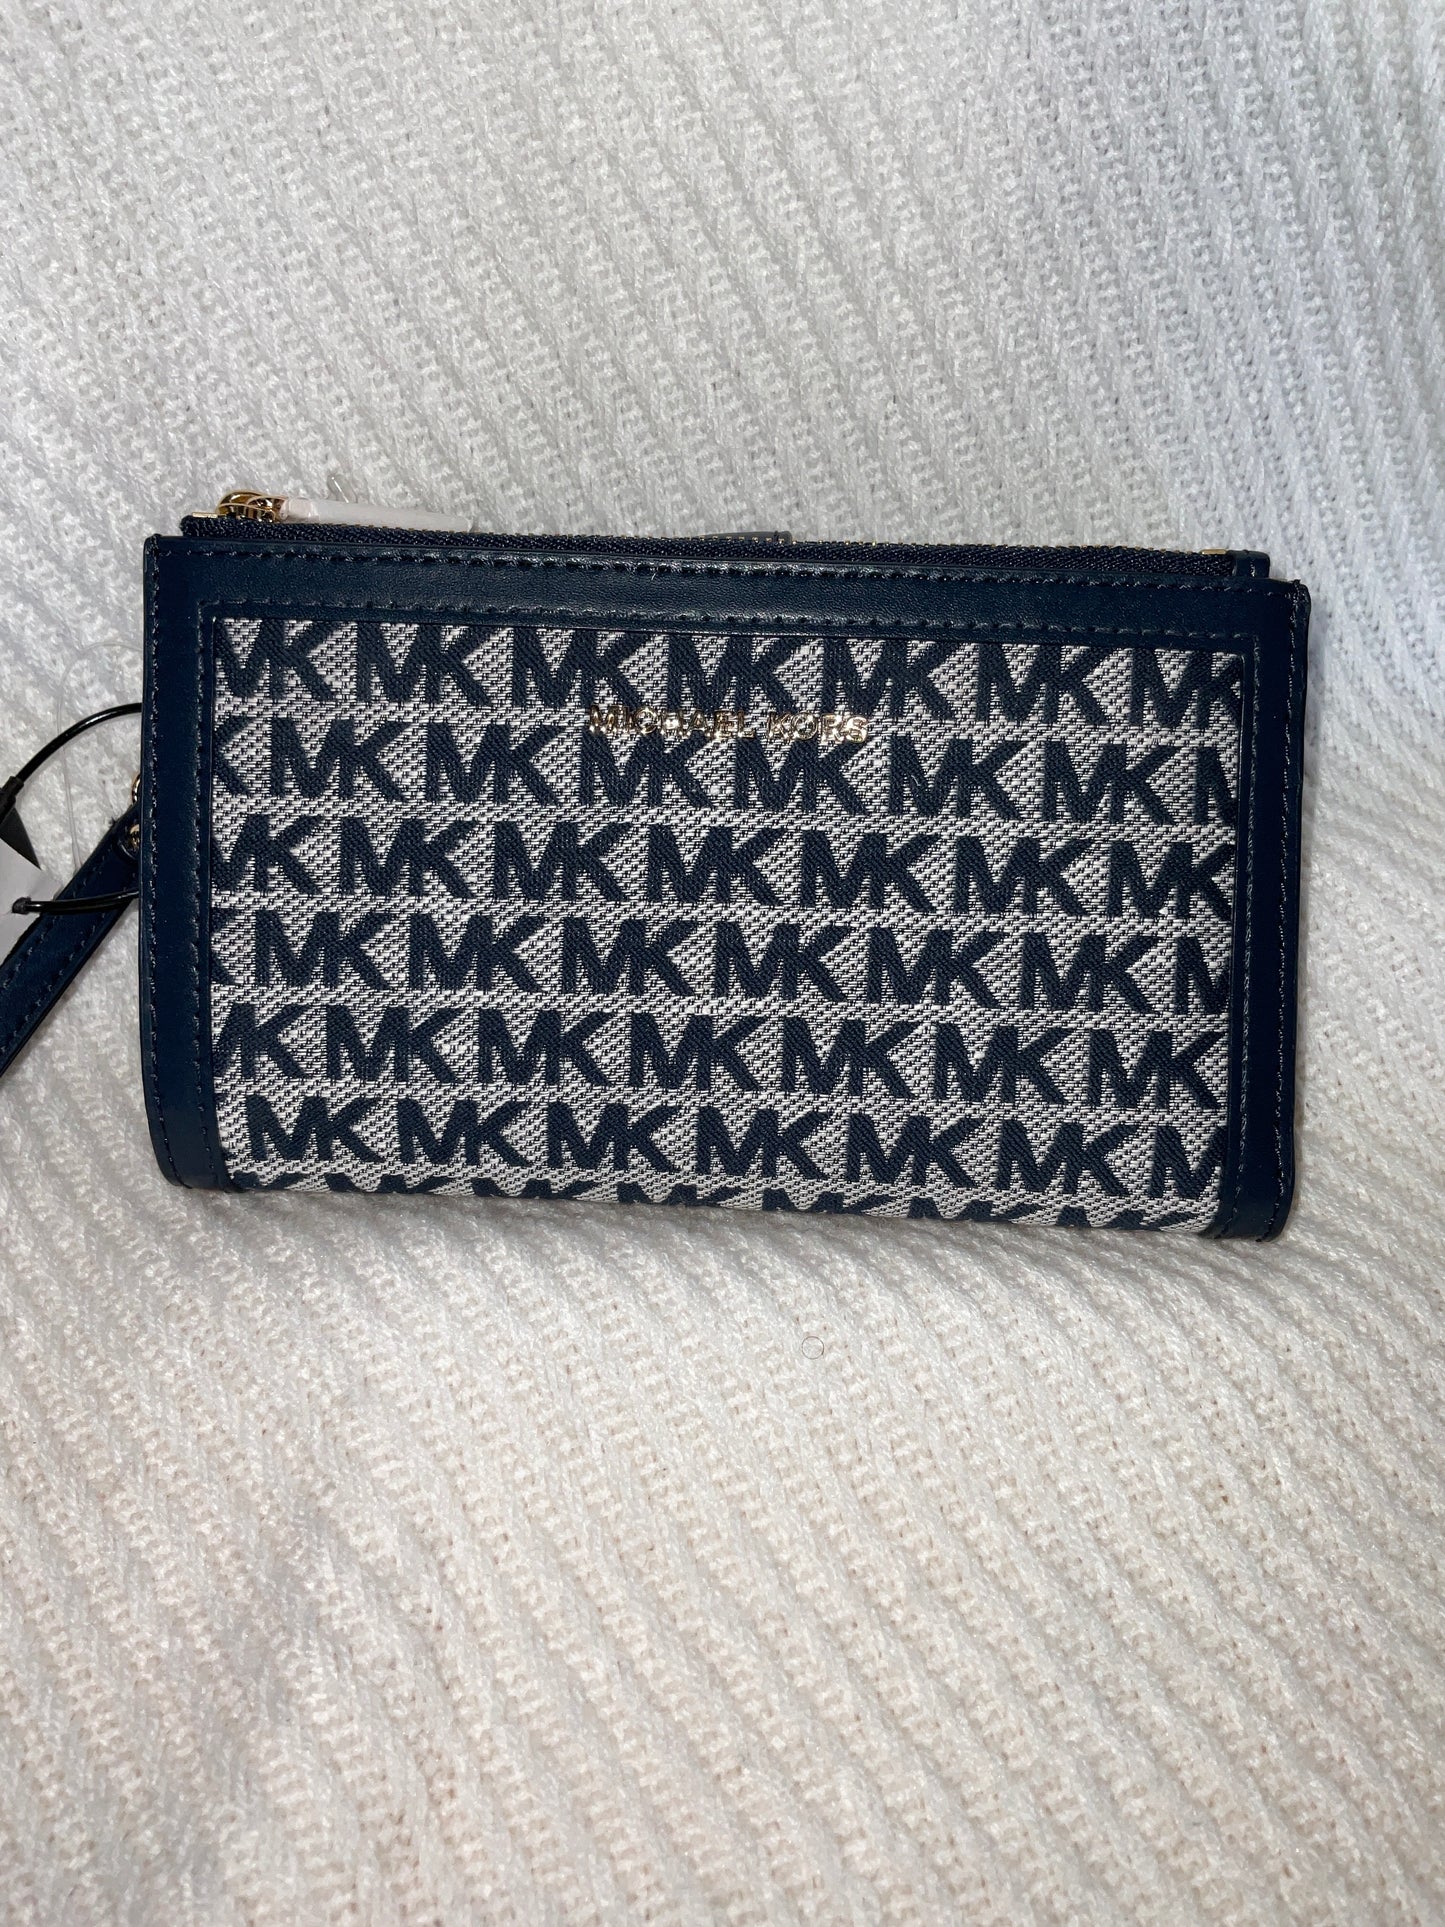 Wallet By Michael Kors  Size: Large